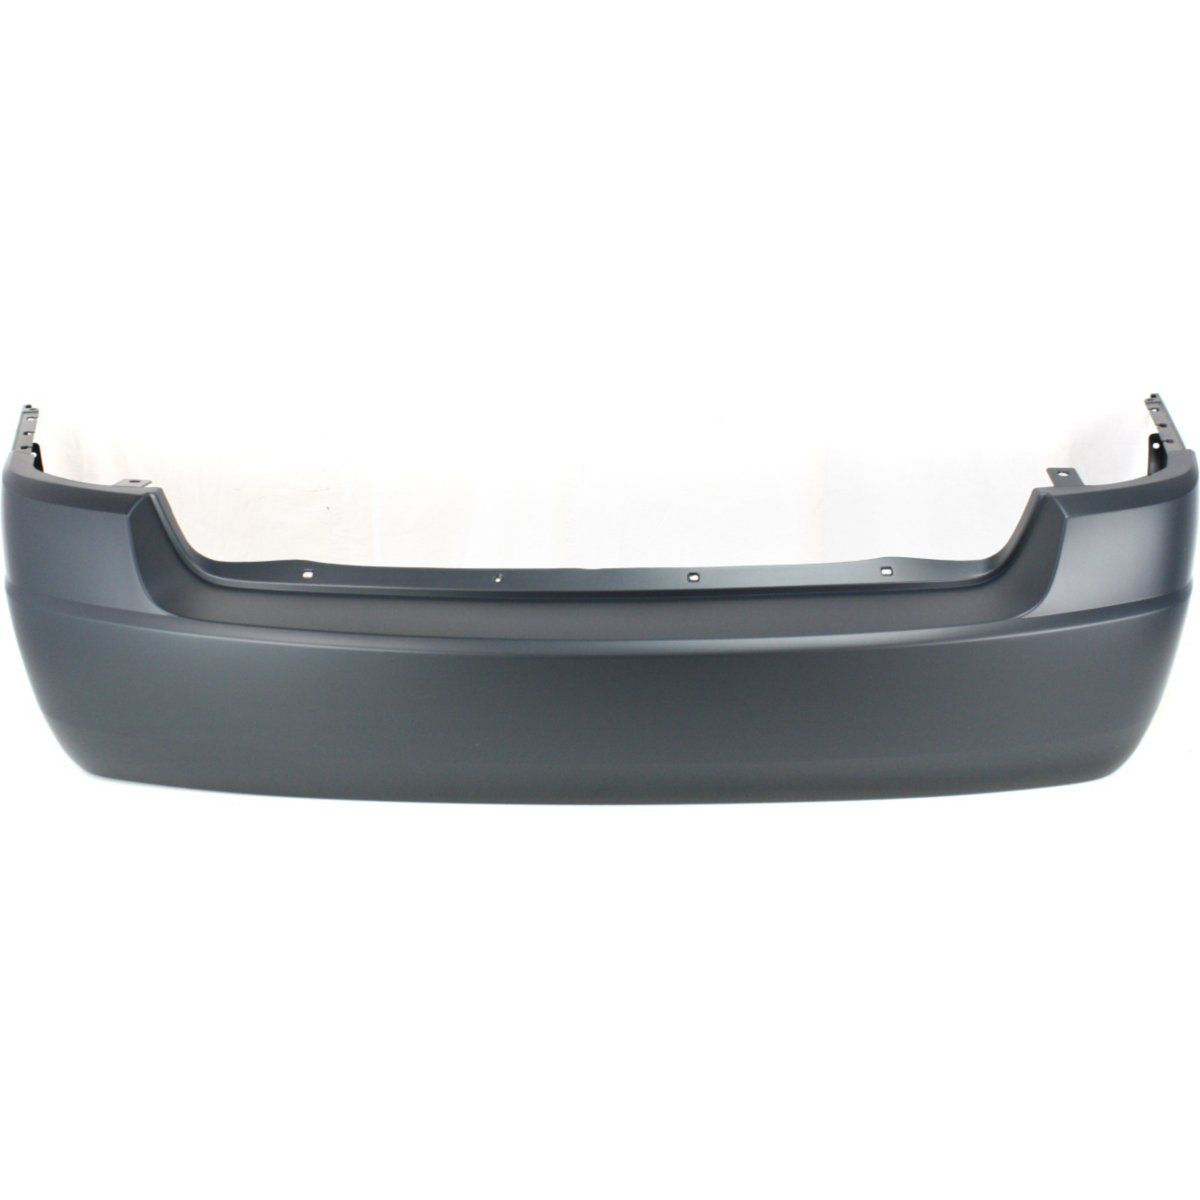 2004-2008 CHEVY MALIBU Rear Bumper Cover except SS Painted to Match